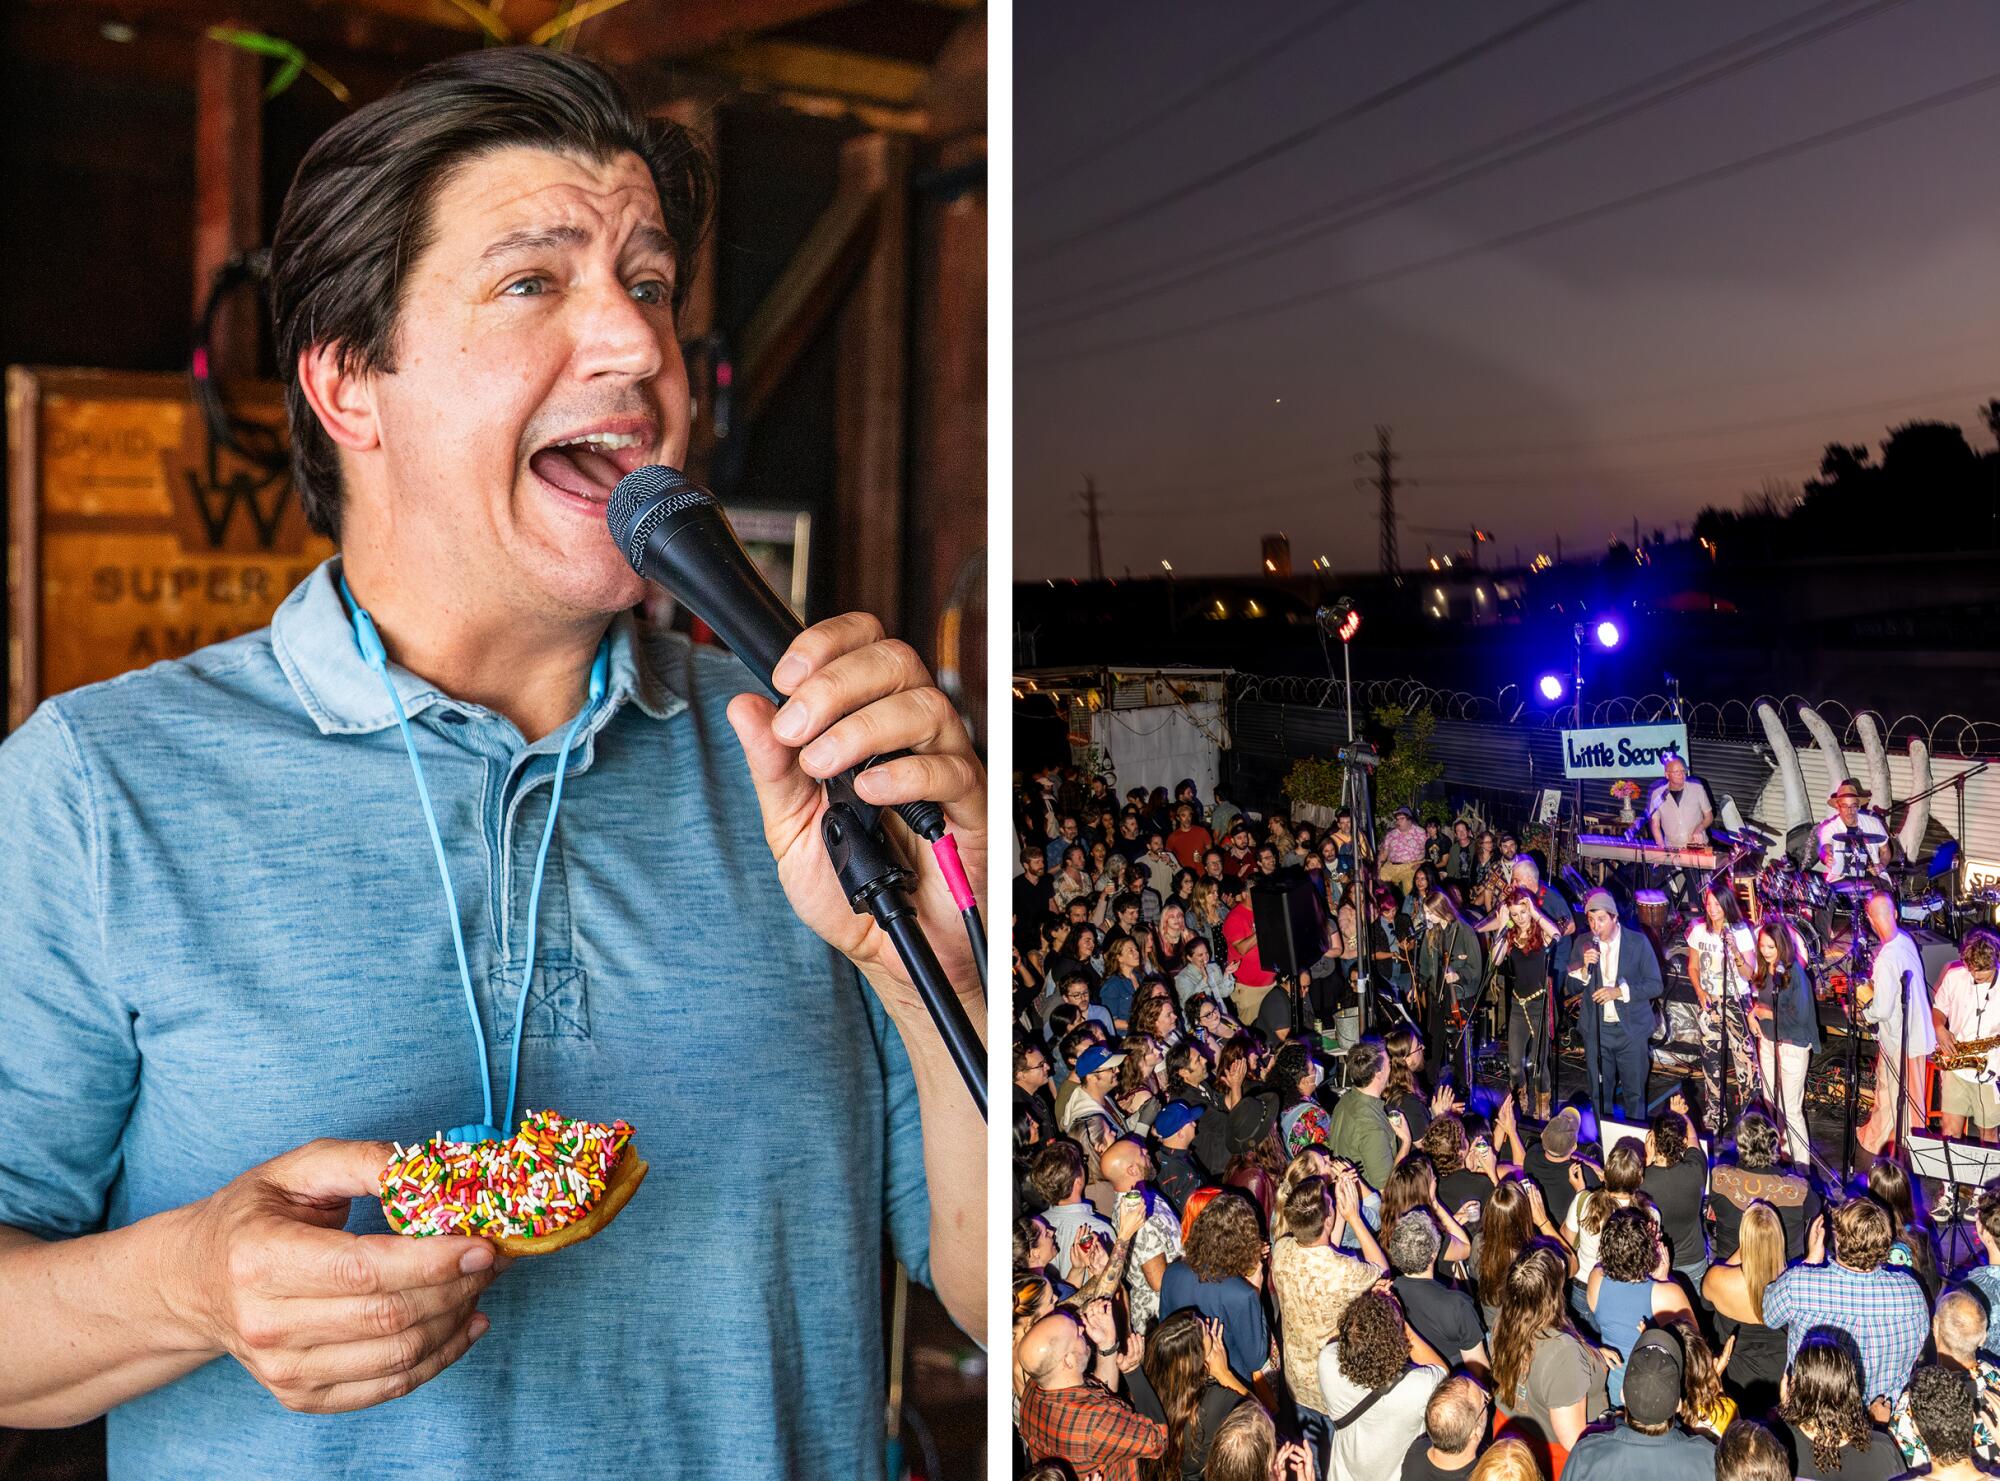 Two photos next to each other, one of Ken Marino singing with a donut in his hand, and the other of a crowd at a concert.